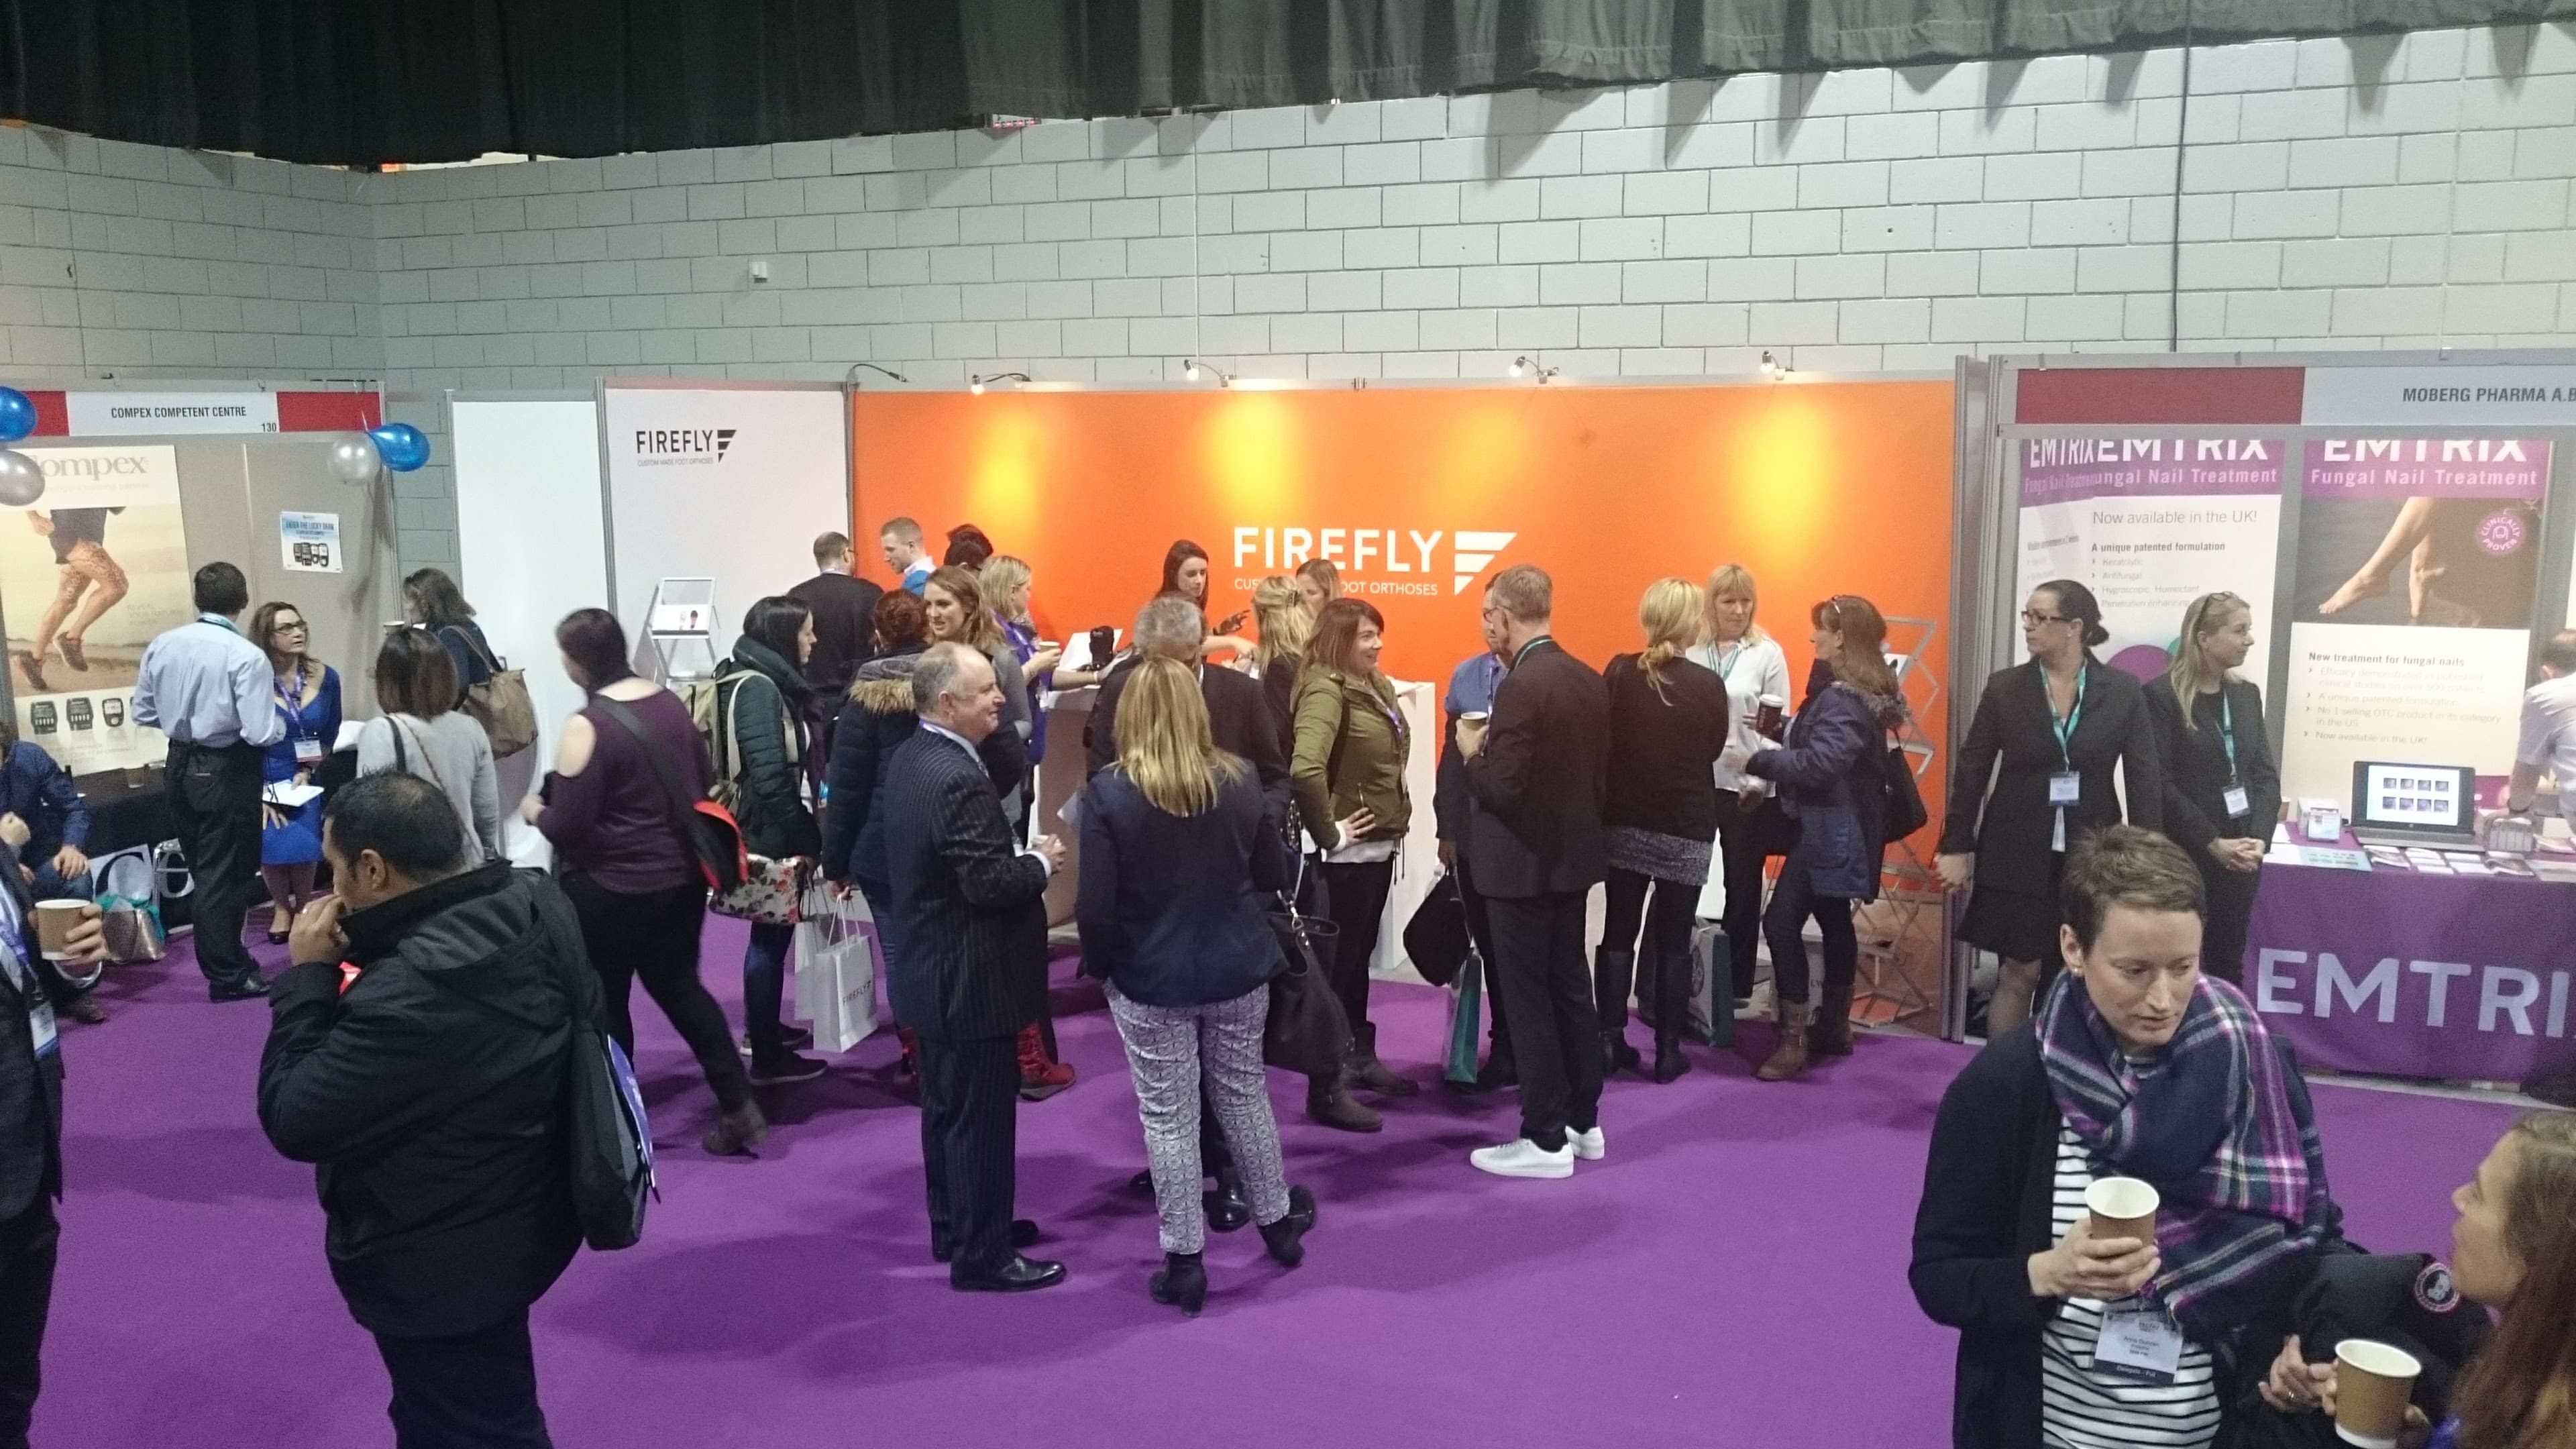 Getting busy at the stand